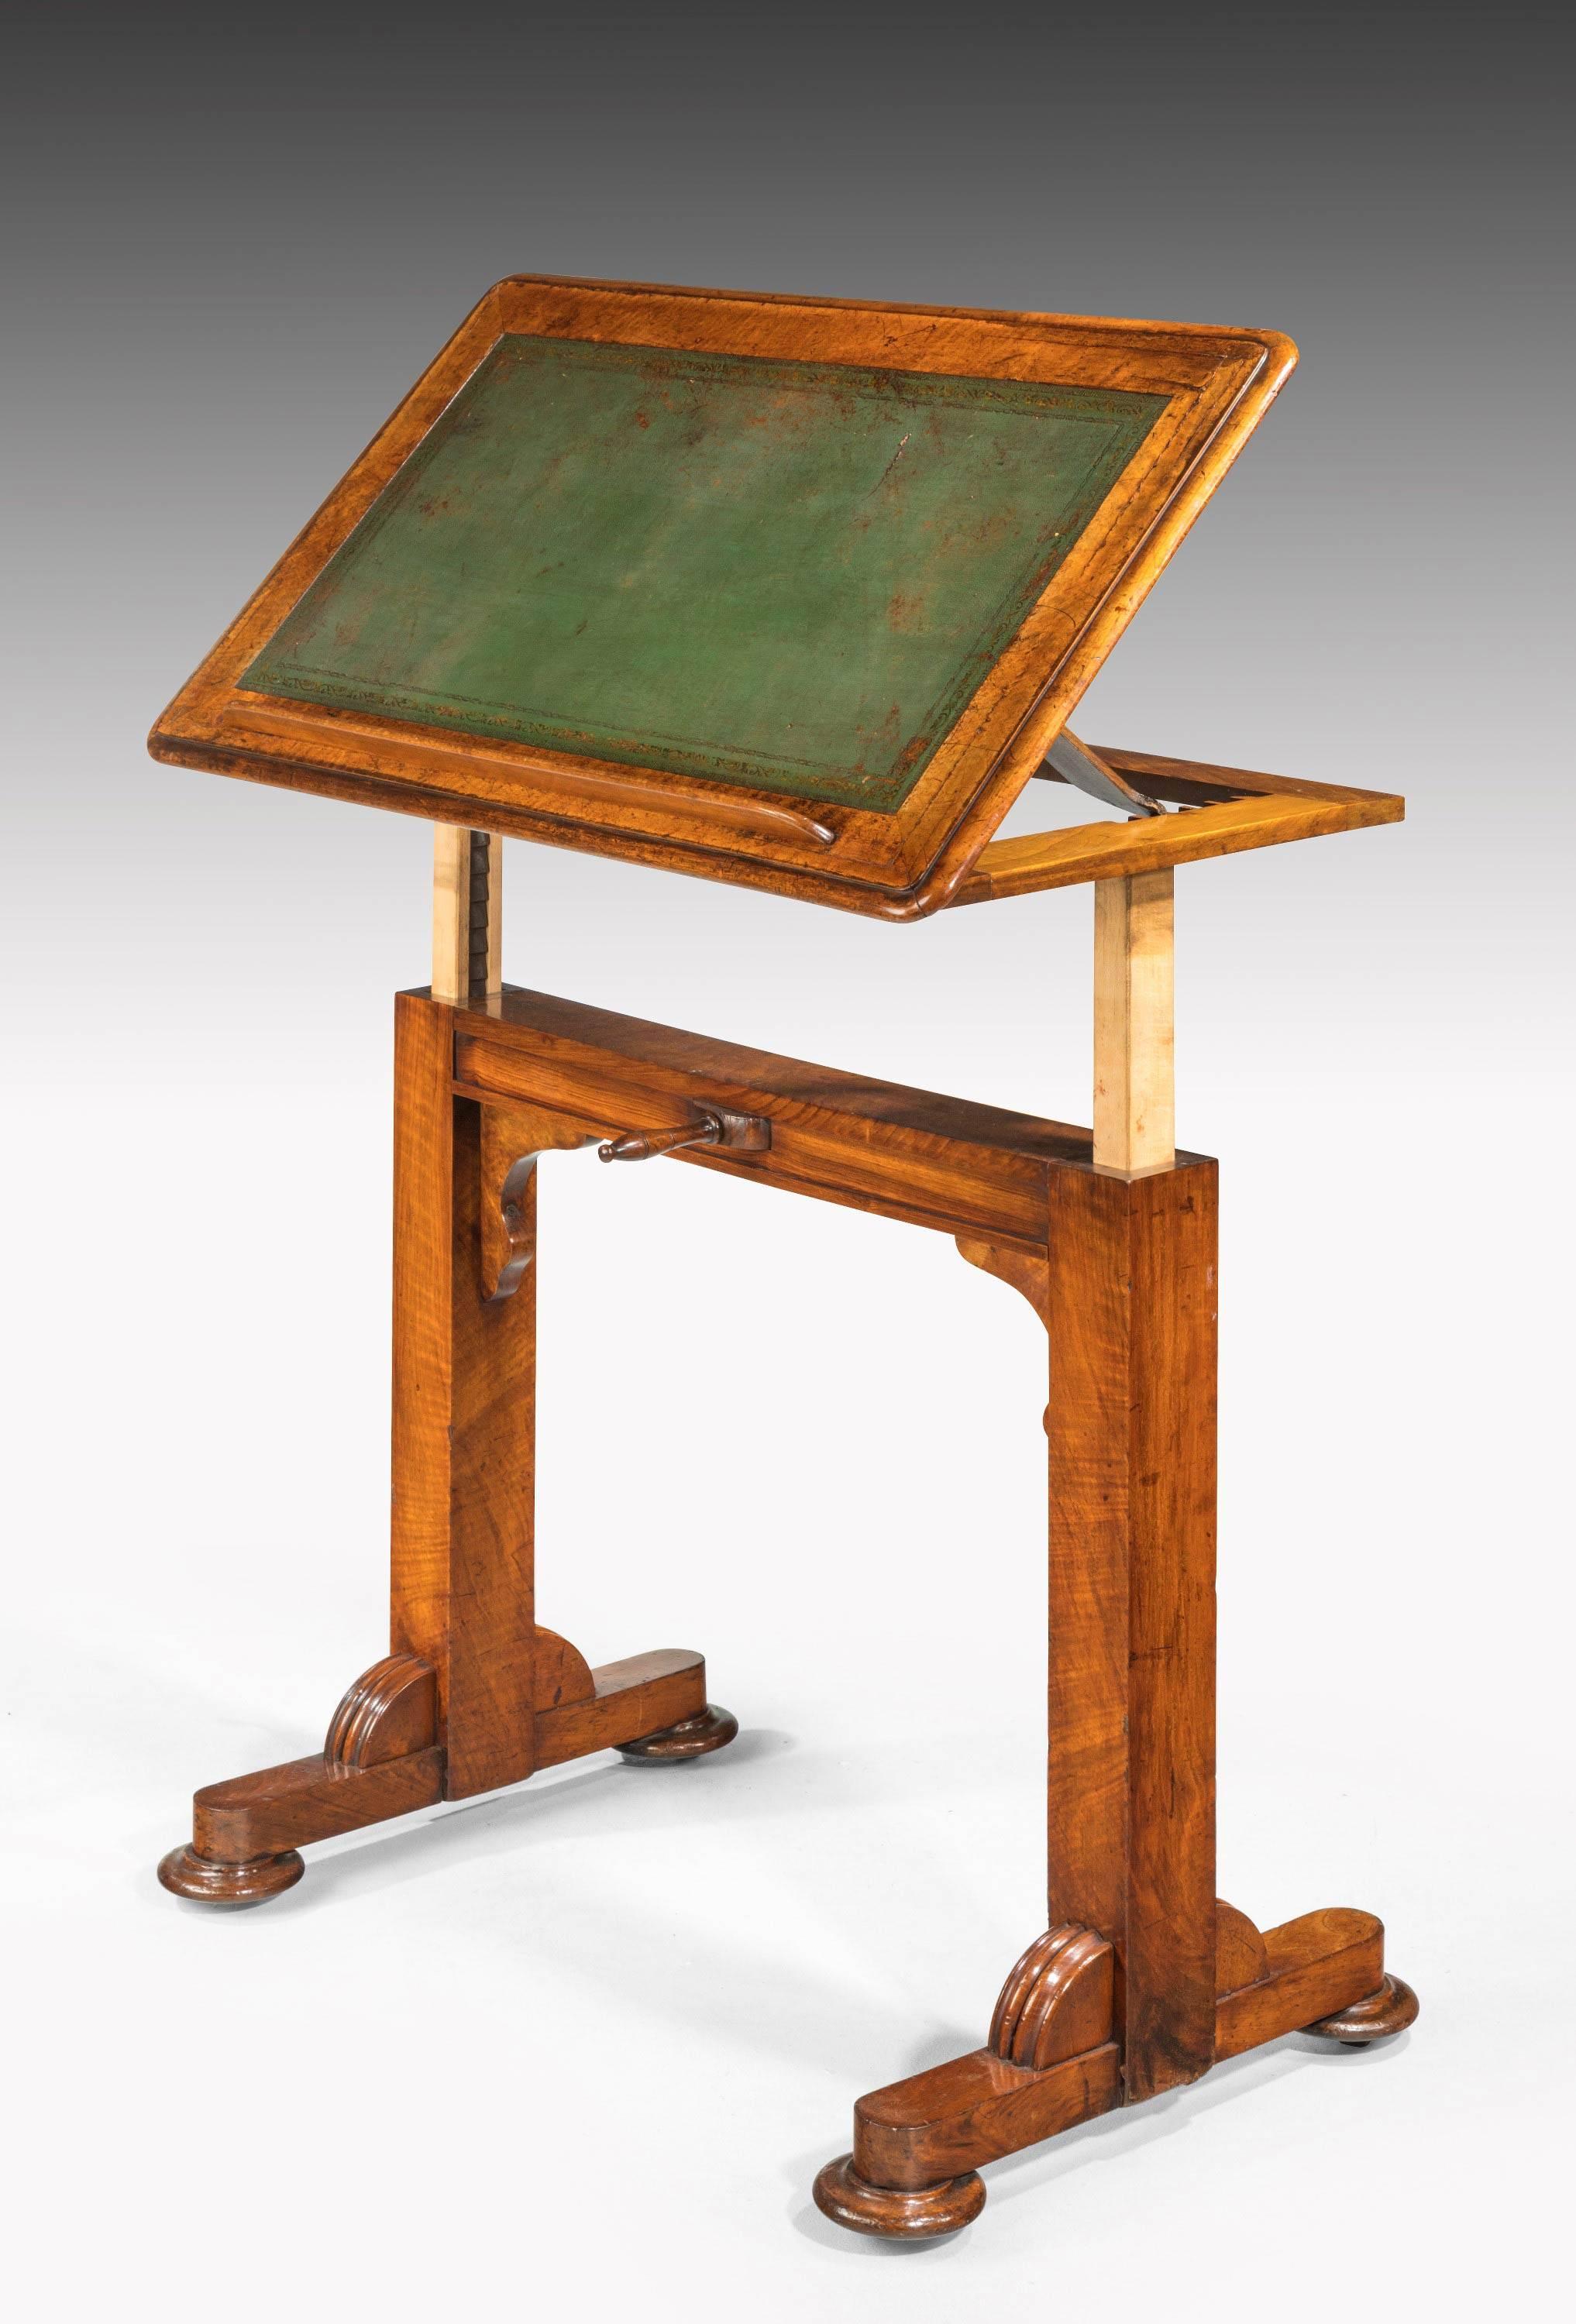 Late Regency period mahogany writing or reading table. On a moveable and adjustable ratchet. On substantial turned supports. Involving a sliding height mechanism. 

The height being able to adjust to 51 inches.